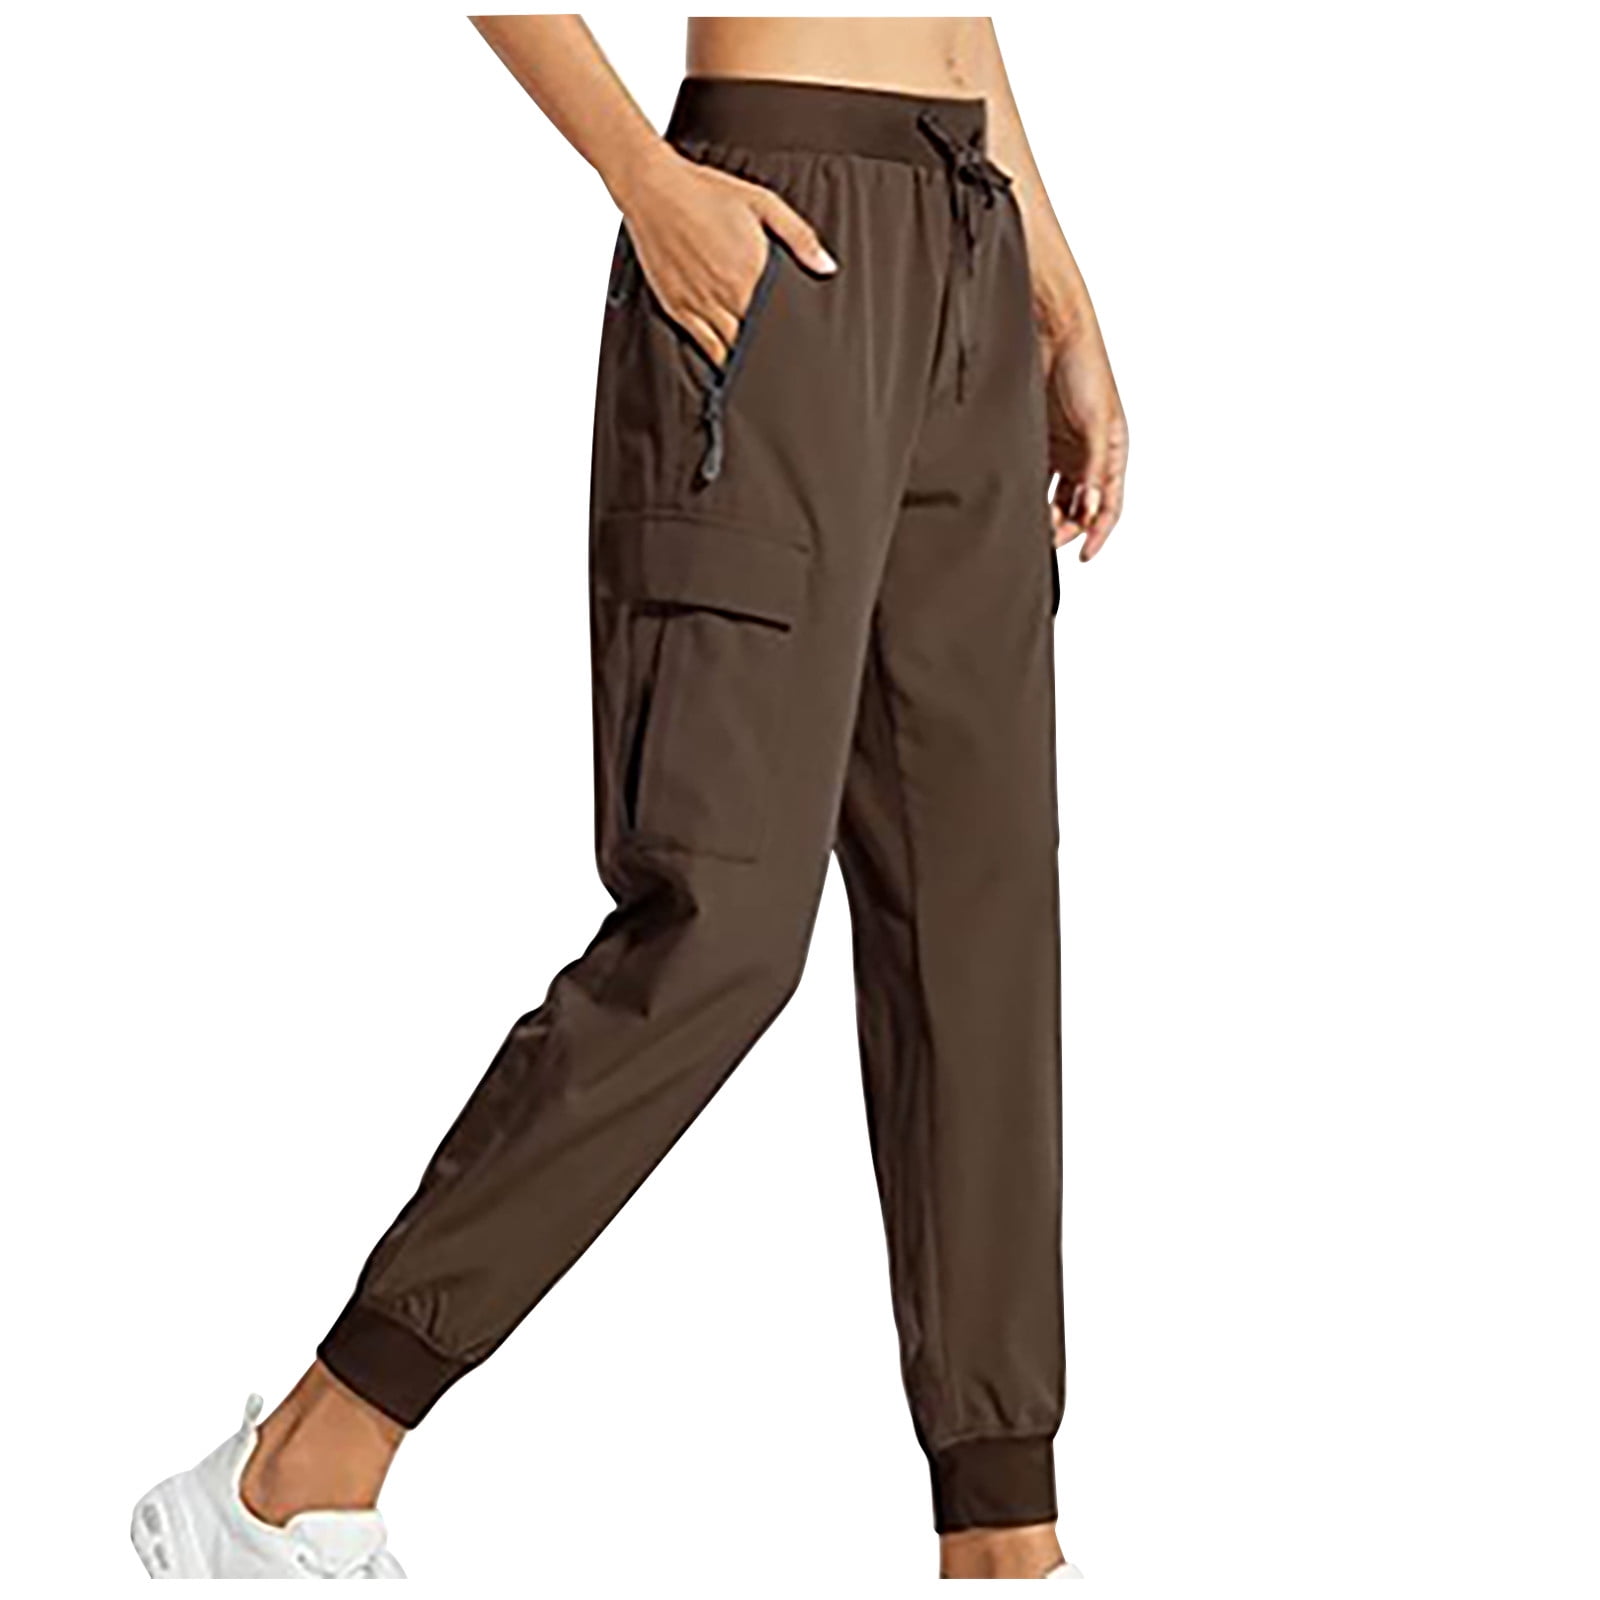 Women's Summer Trousers Quick-dry Breathable Outdoor Ultra-thin Elastic  Pants | eBay